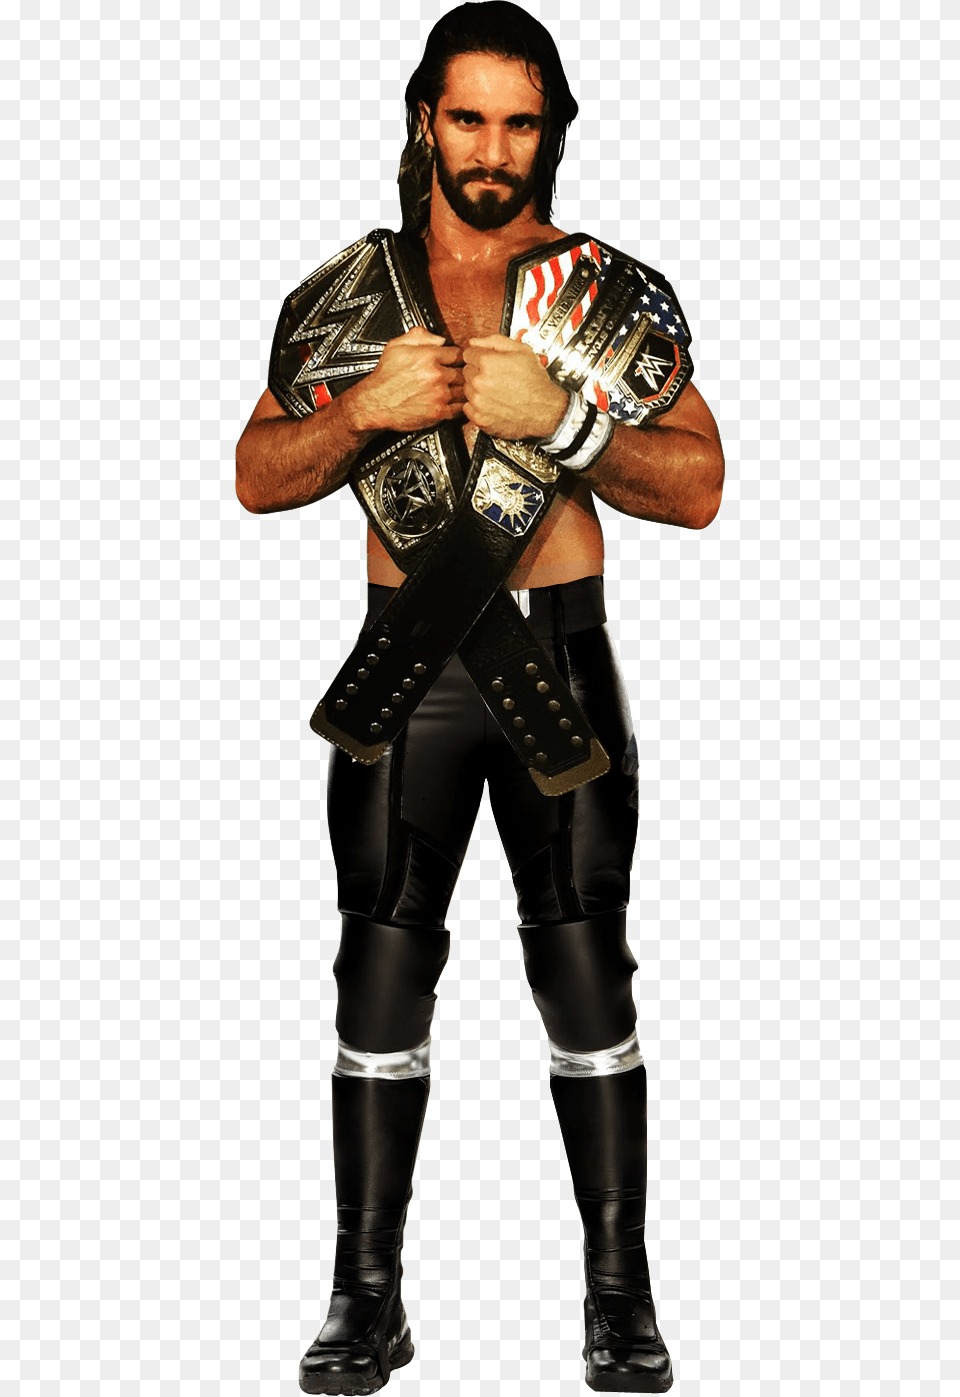 Seth Rollins File Wwe Seth Rollins Standee Life Sized Cutout, Clothing, Glove, Woman, Adult Png Image